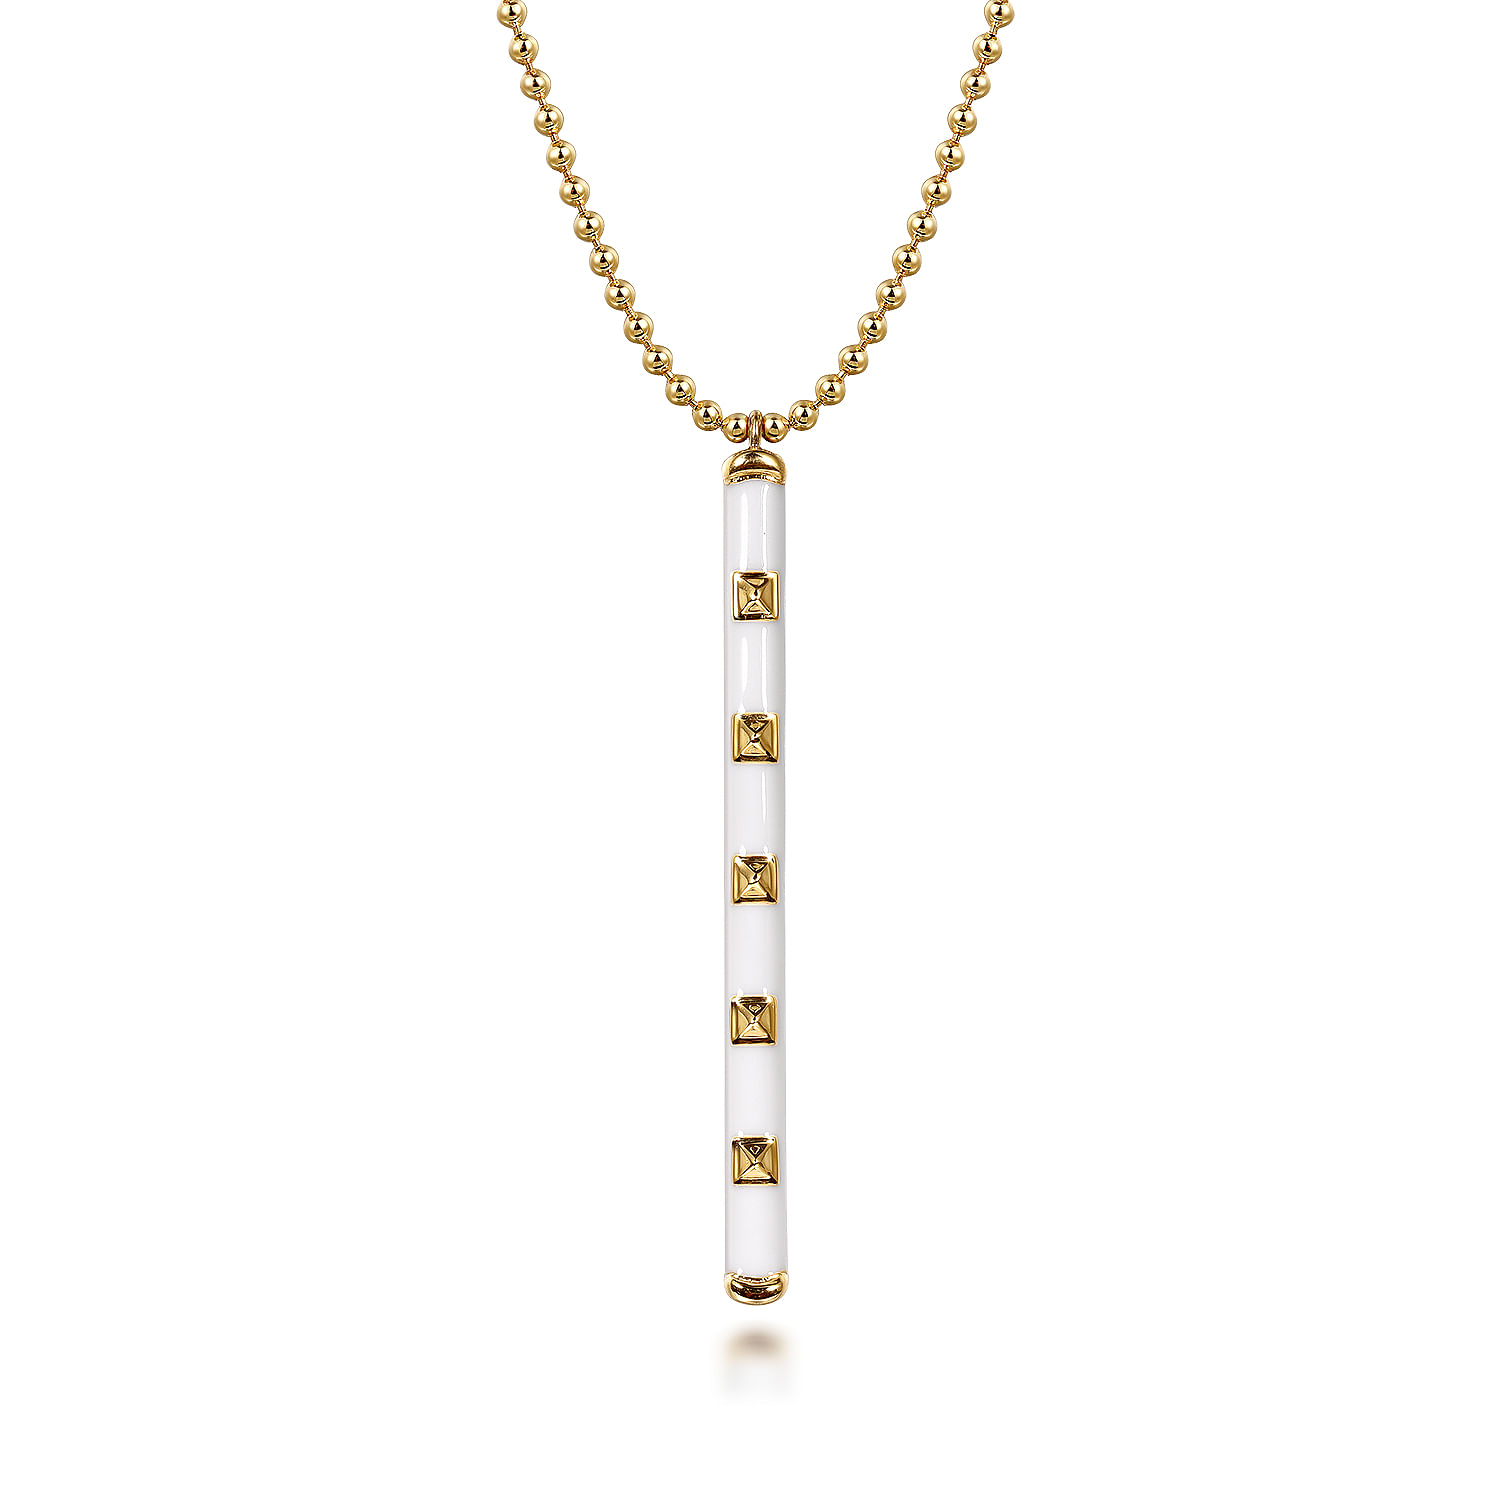 14K Yellow Gold Vertical Bar Necklace with White Enamel